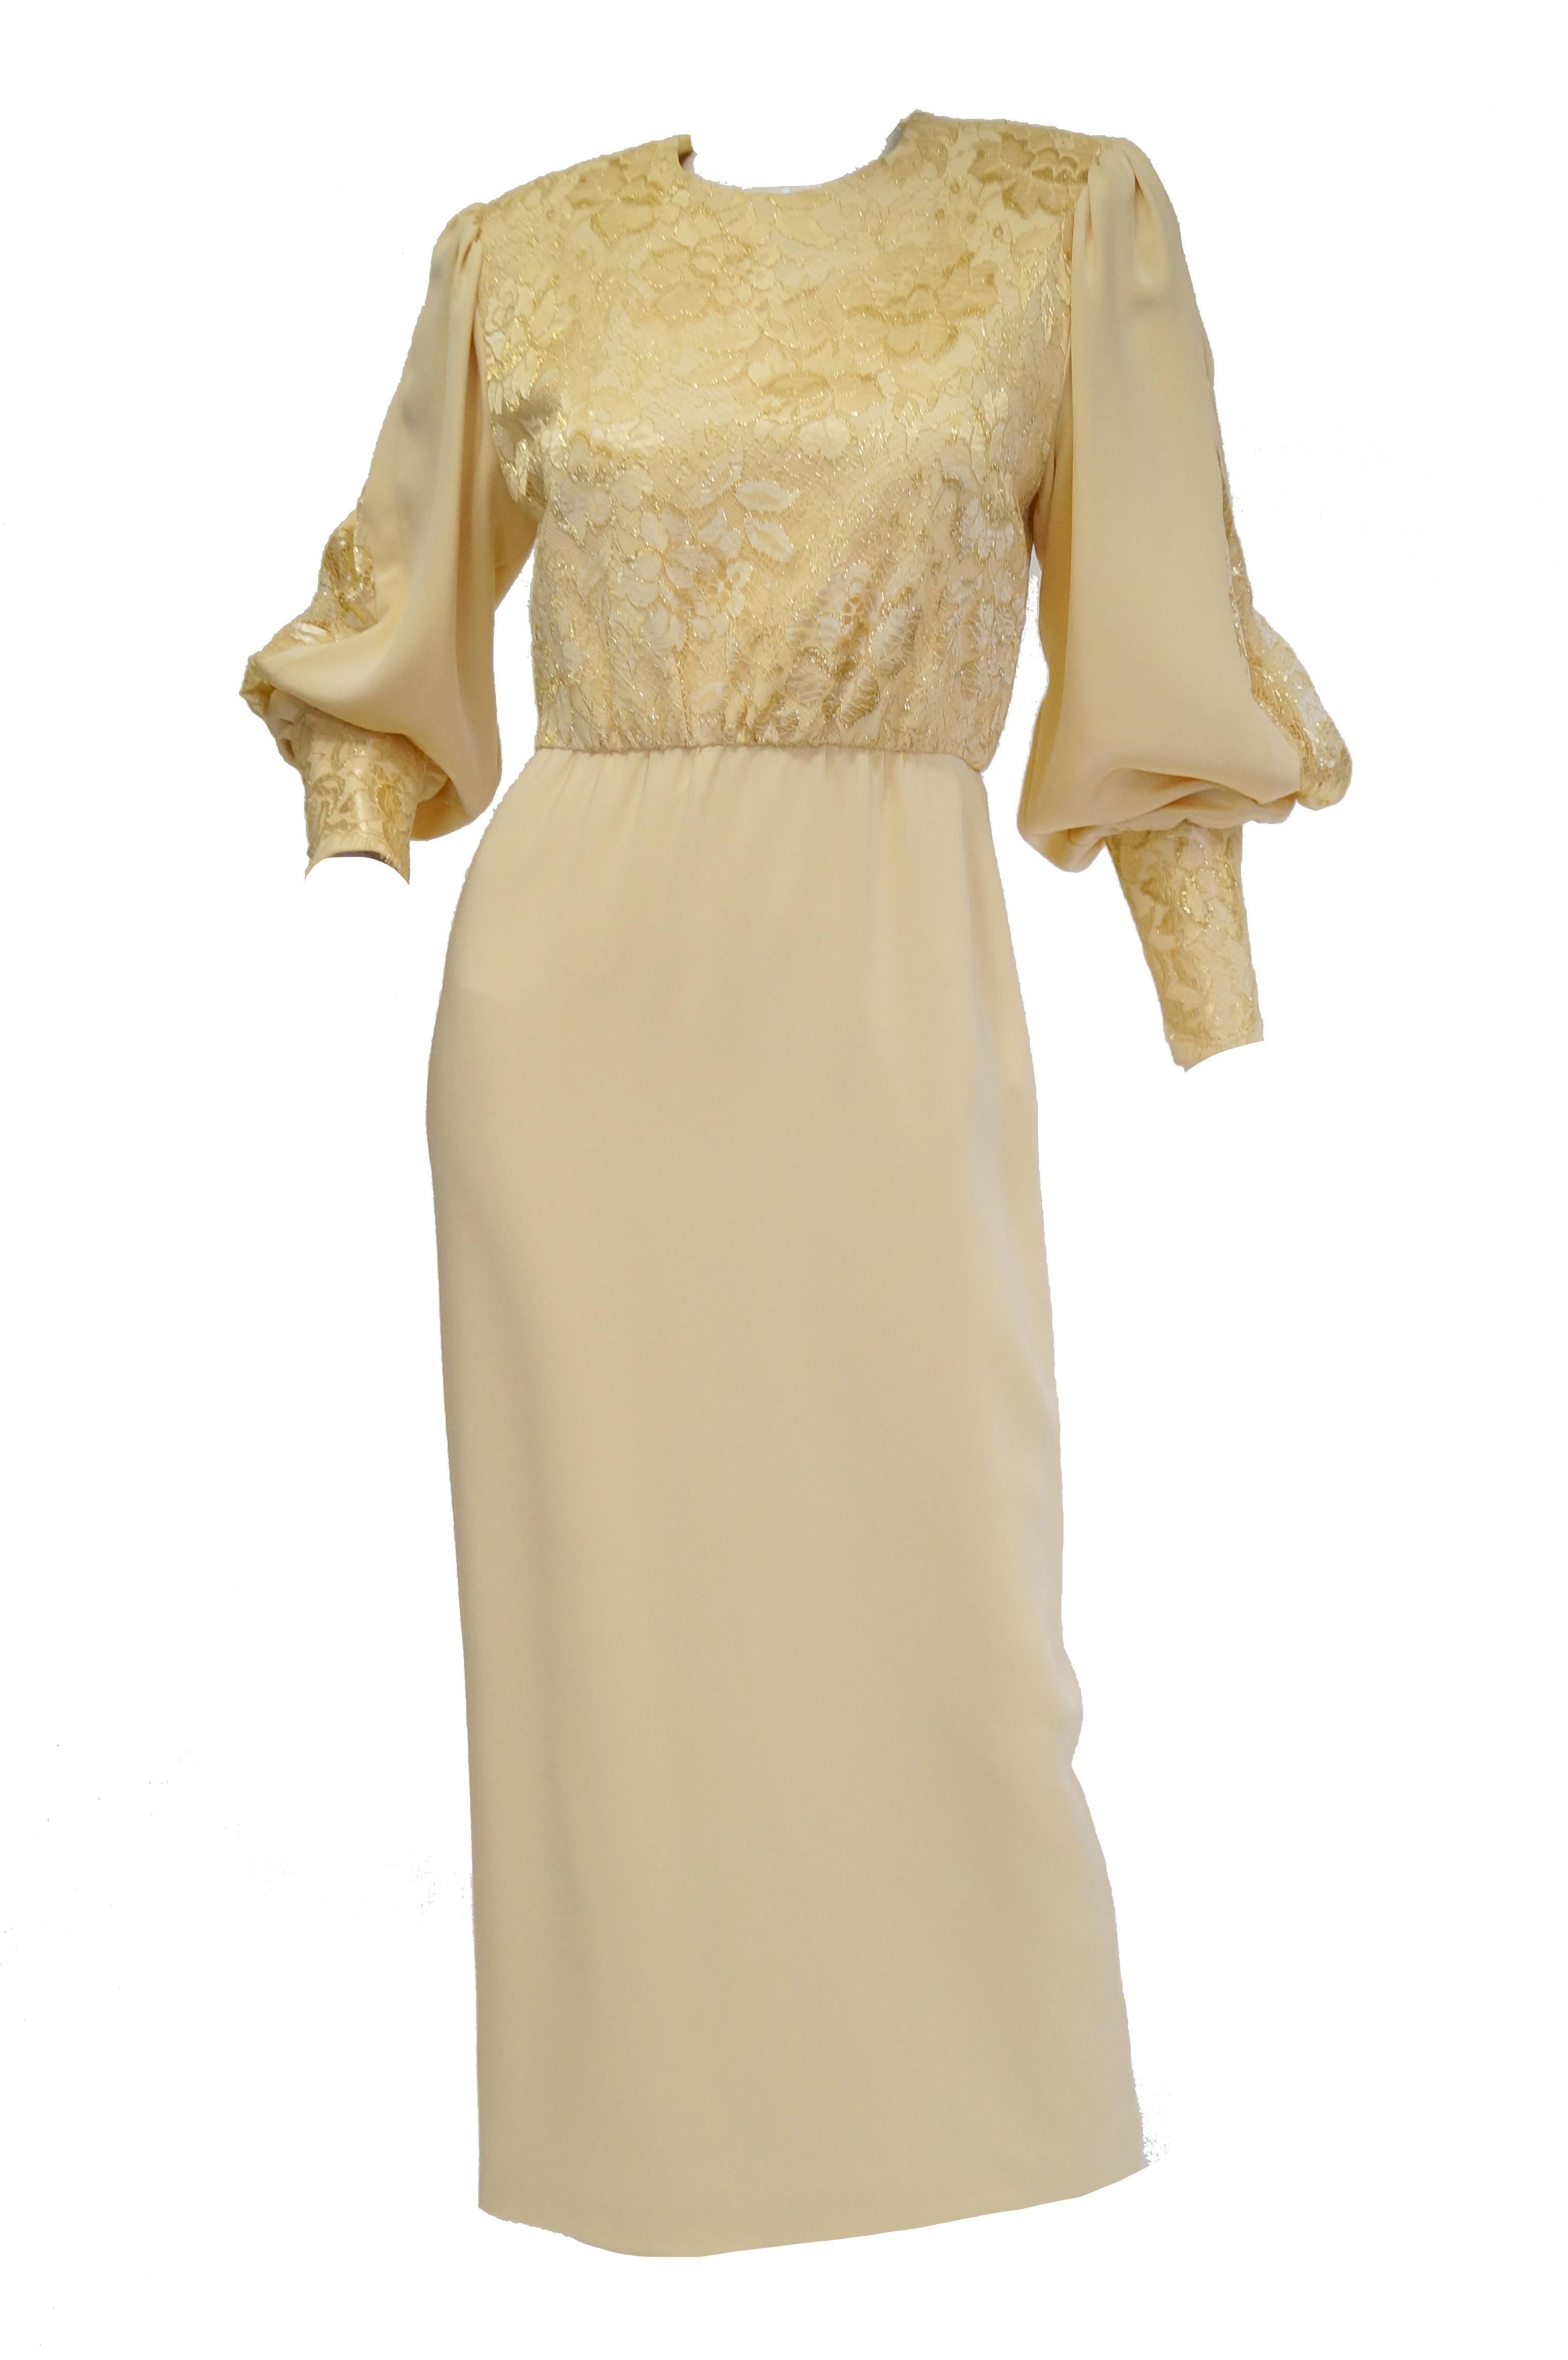 A dreamy ivory/cream evening dress of couture quality design and execution. The dress is maxi length, with long sleeves, an A - line silhouette, and a somewhat loose bodice. The bodice is entirely covered in intricate floral lace, and has a high